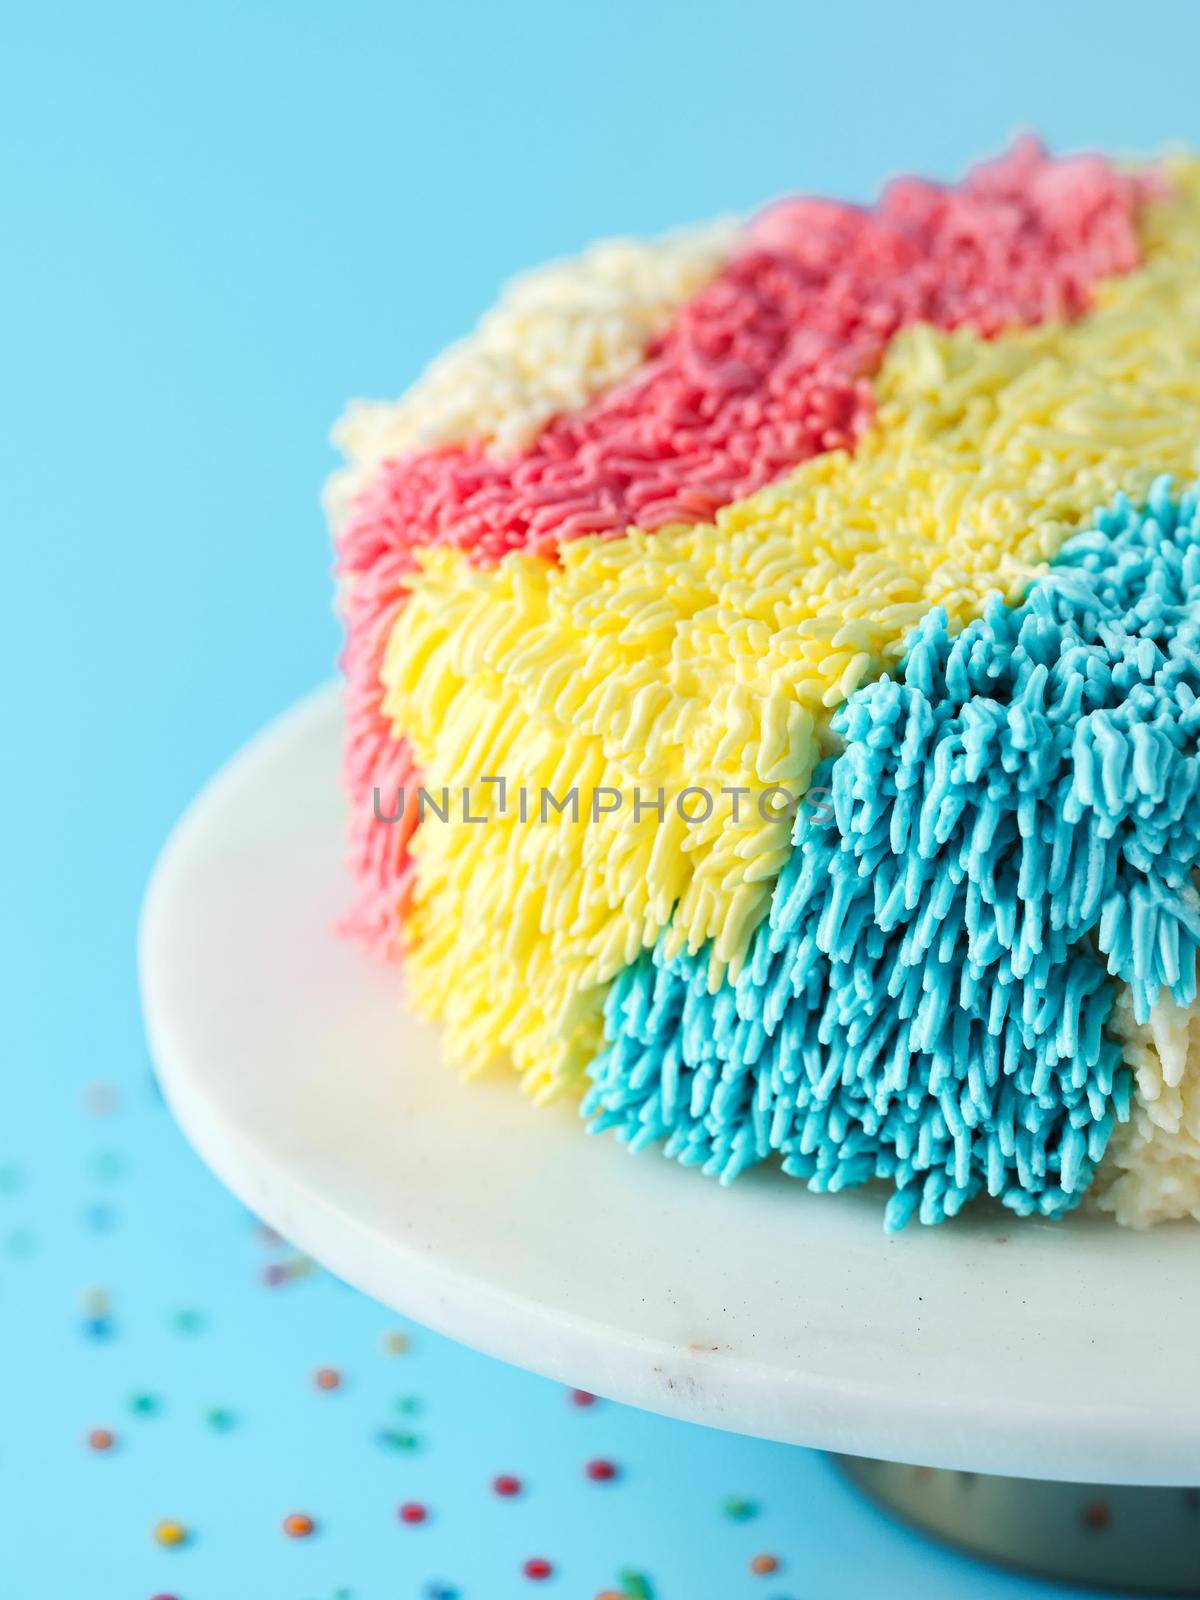 Colorful shag cake on blue background, copy space by fascinadora